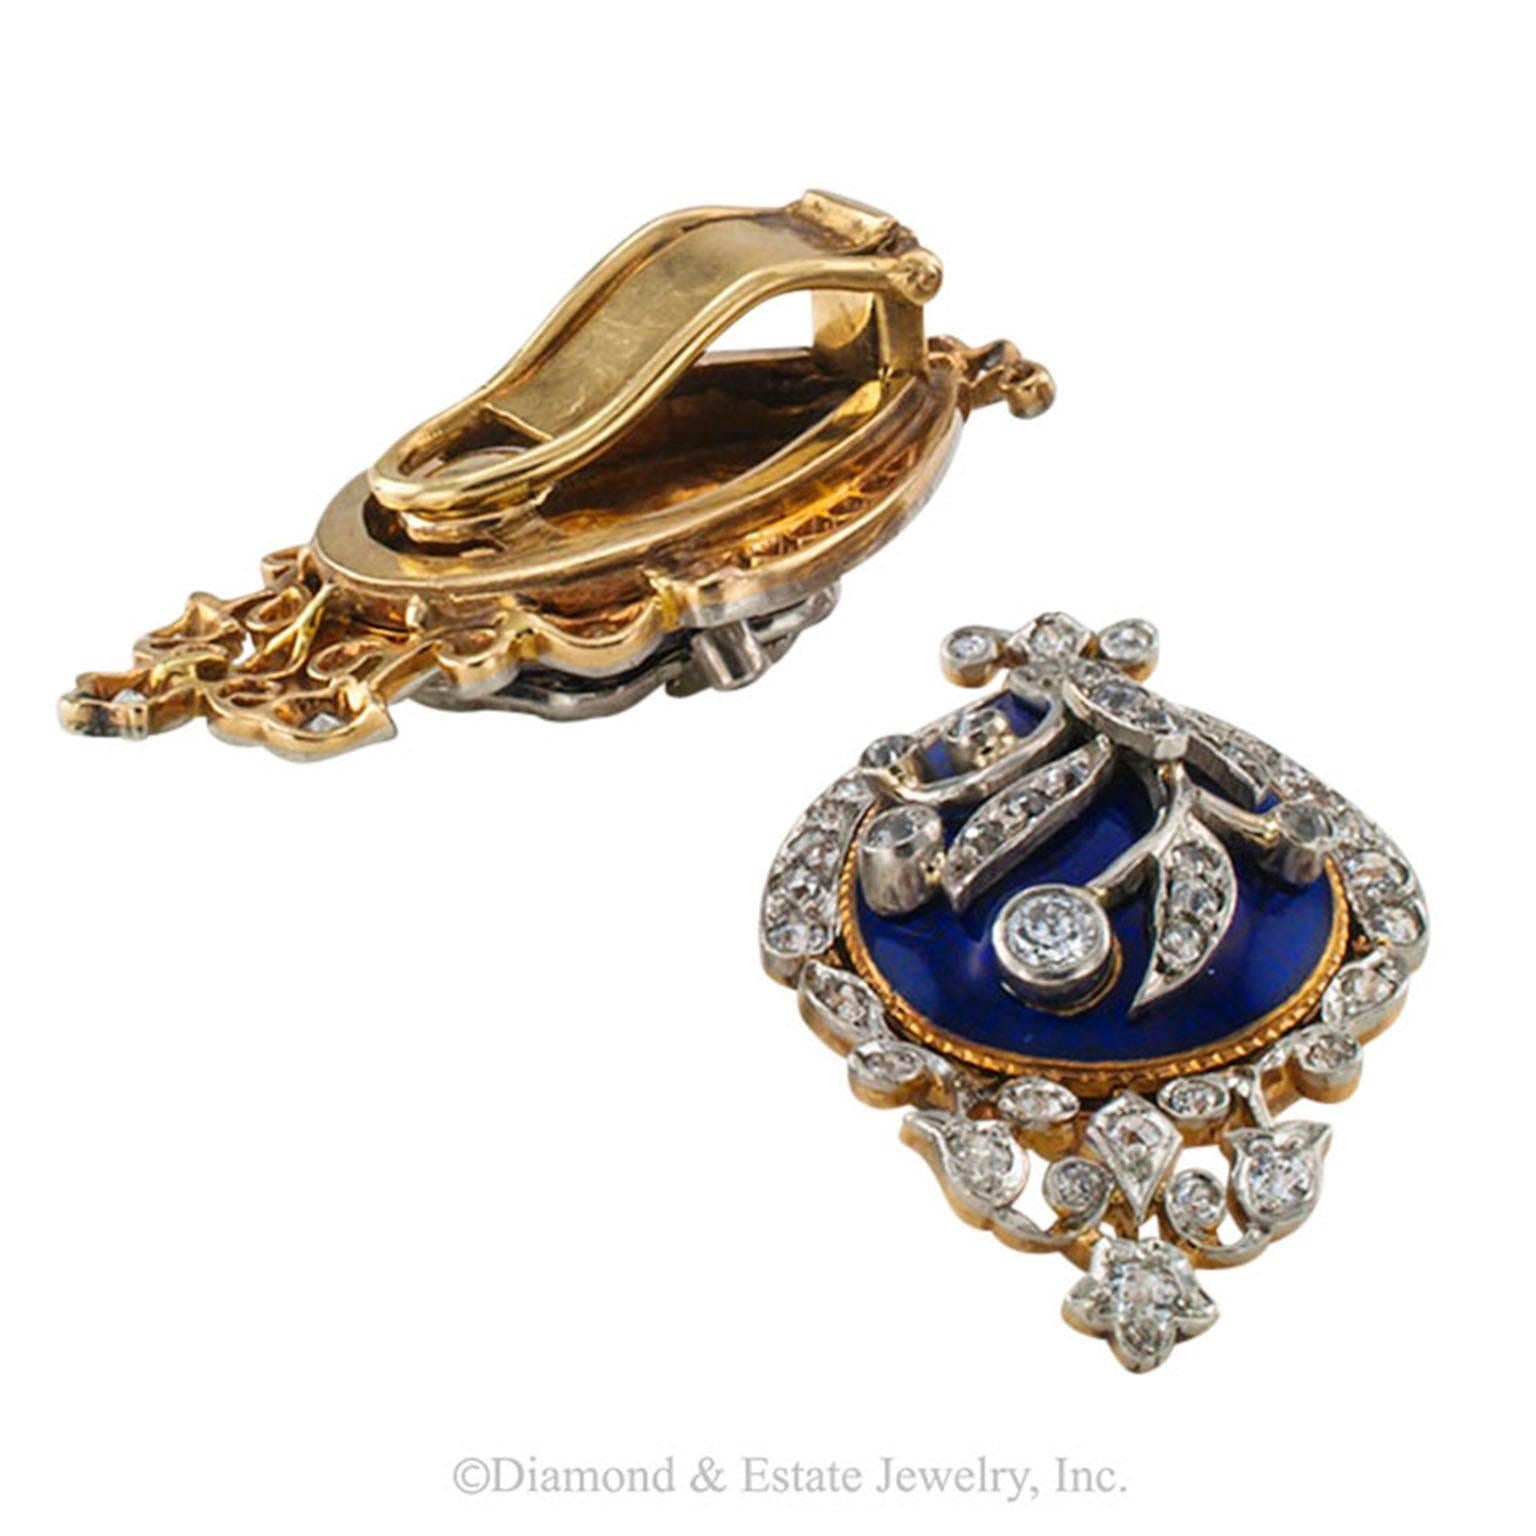 1890s Victorian Royal Blue Enamel and Diamond Ear Clips

Victorian blue enamel and diamond ear clips mounted in 14-karat gold and platinum, circa 1890.  There is something about this pair of antique earrings that makes them look very Regal.  Could